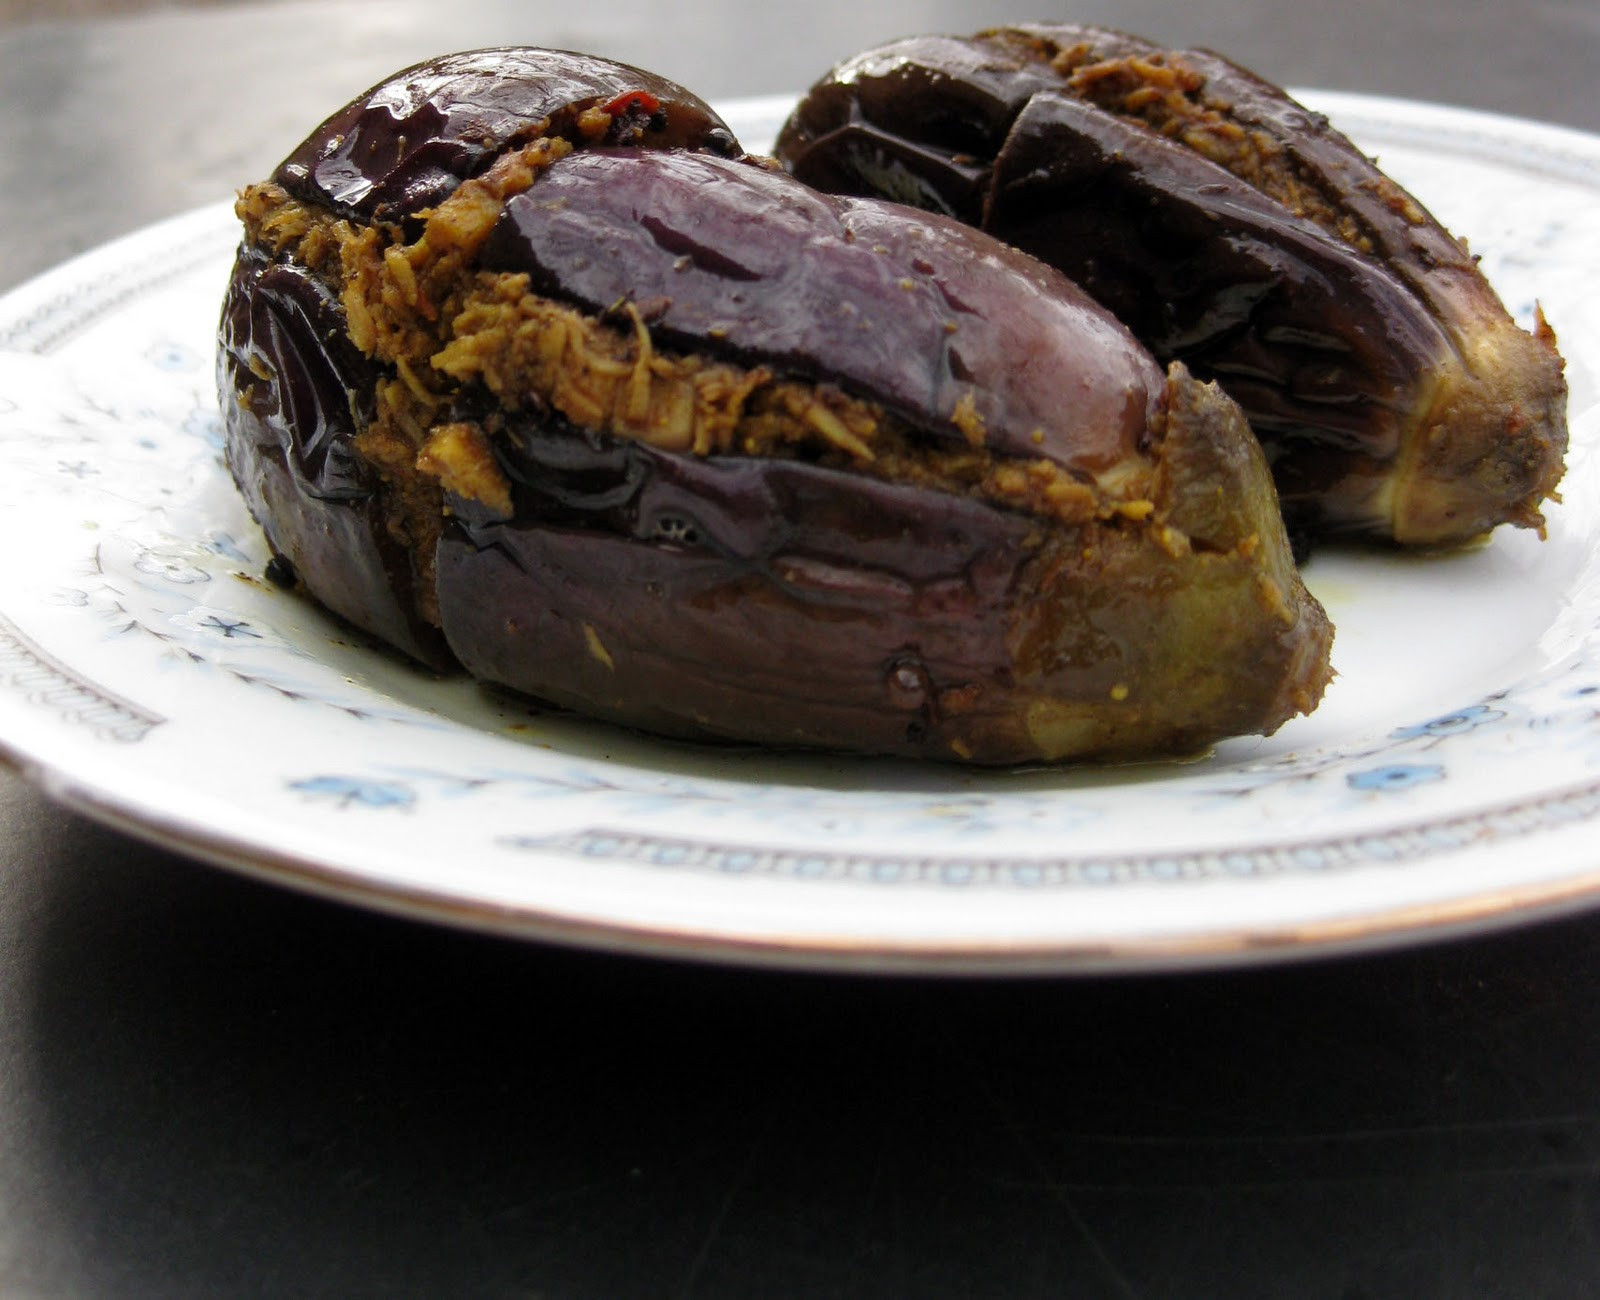 Indian Baby Eggplant Recipes
 Baby Eggplant with Indian Spices Bharvaan Baingan paleo